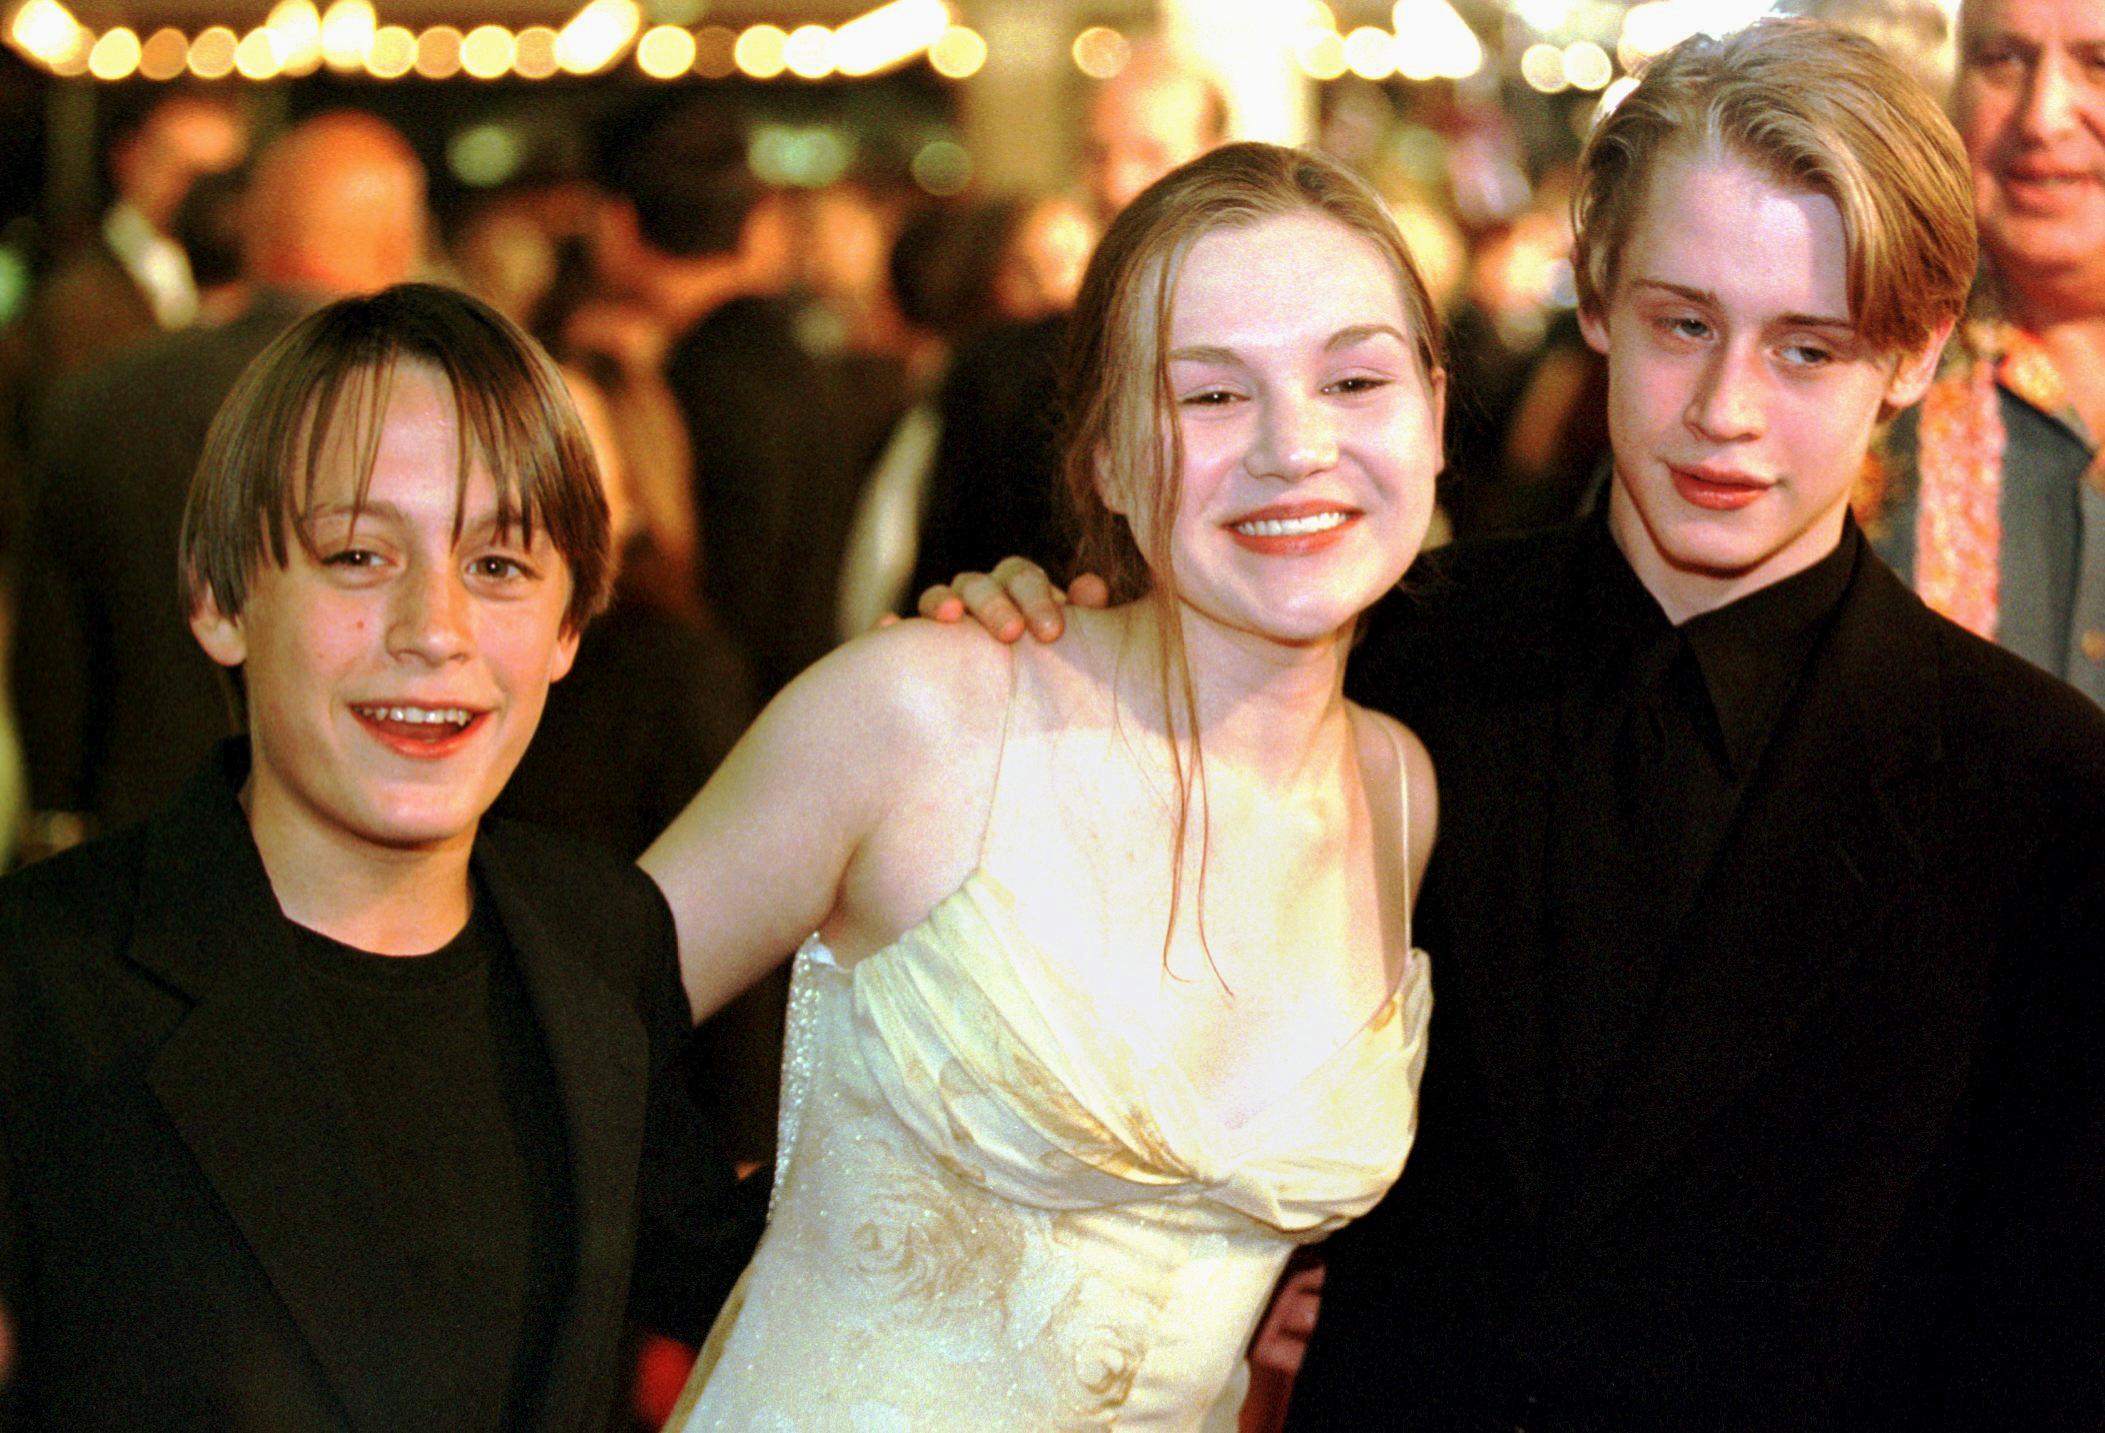 Kieran Culkin and Macaulay Culkin with actress Rachel Minor at the premiere of the new Miramax film "The Mighty," at the Cineplex Odeon Theater in Century City, California. | Source: Getty Images